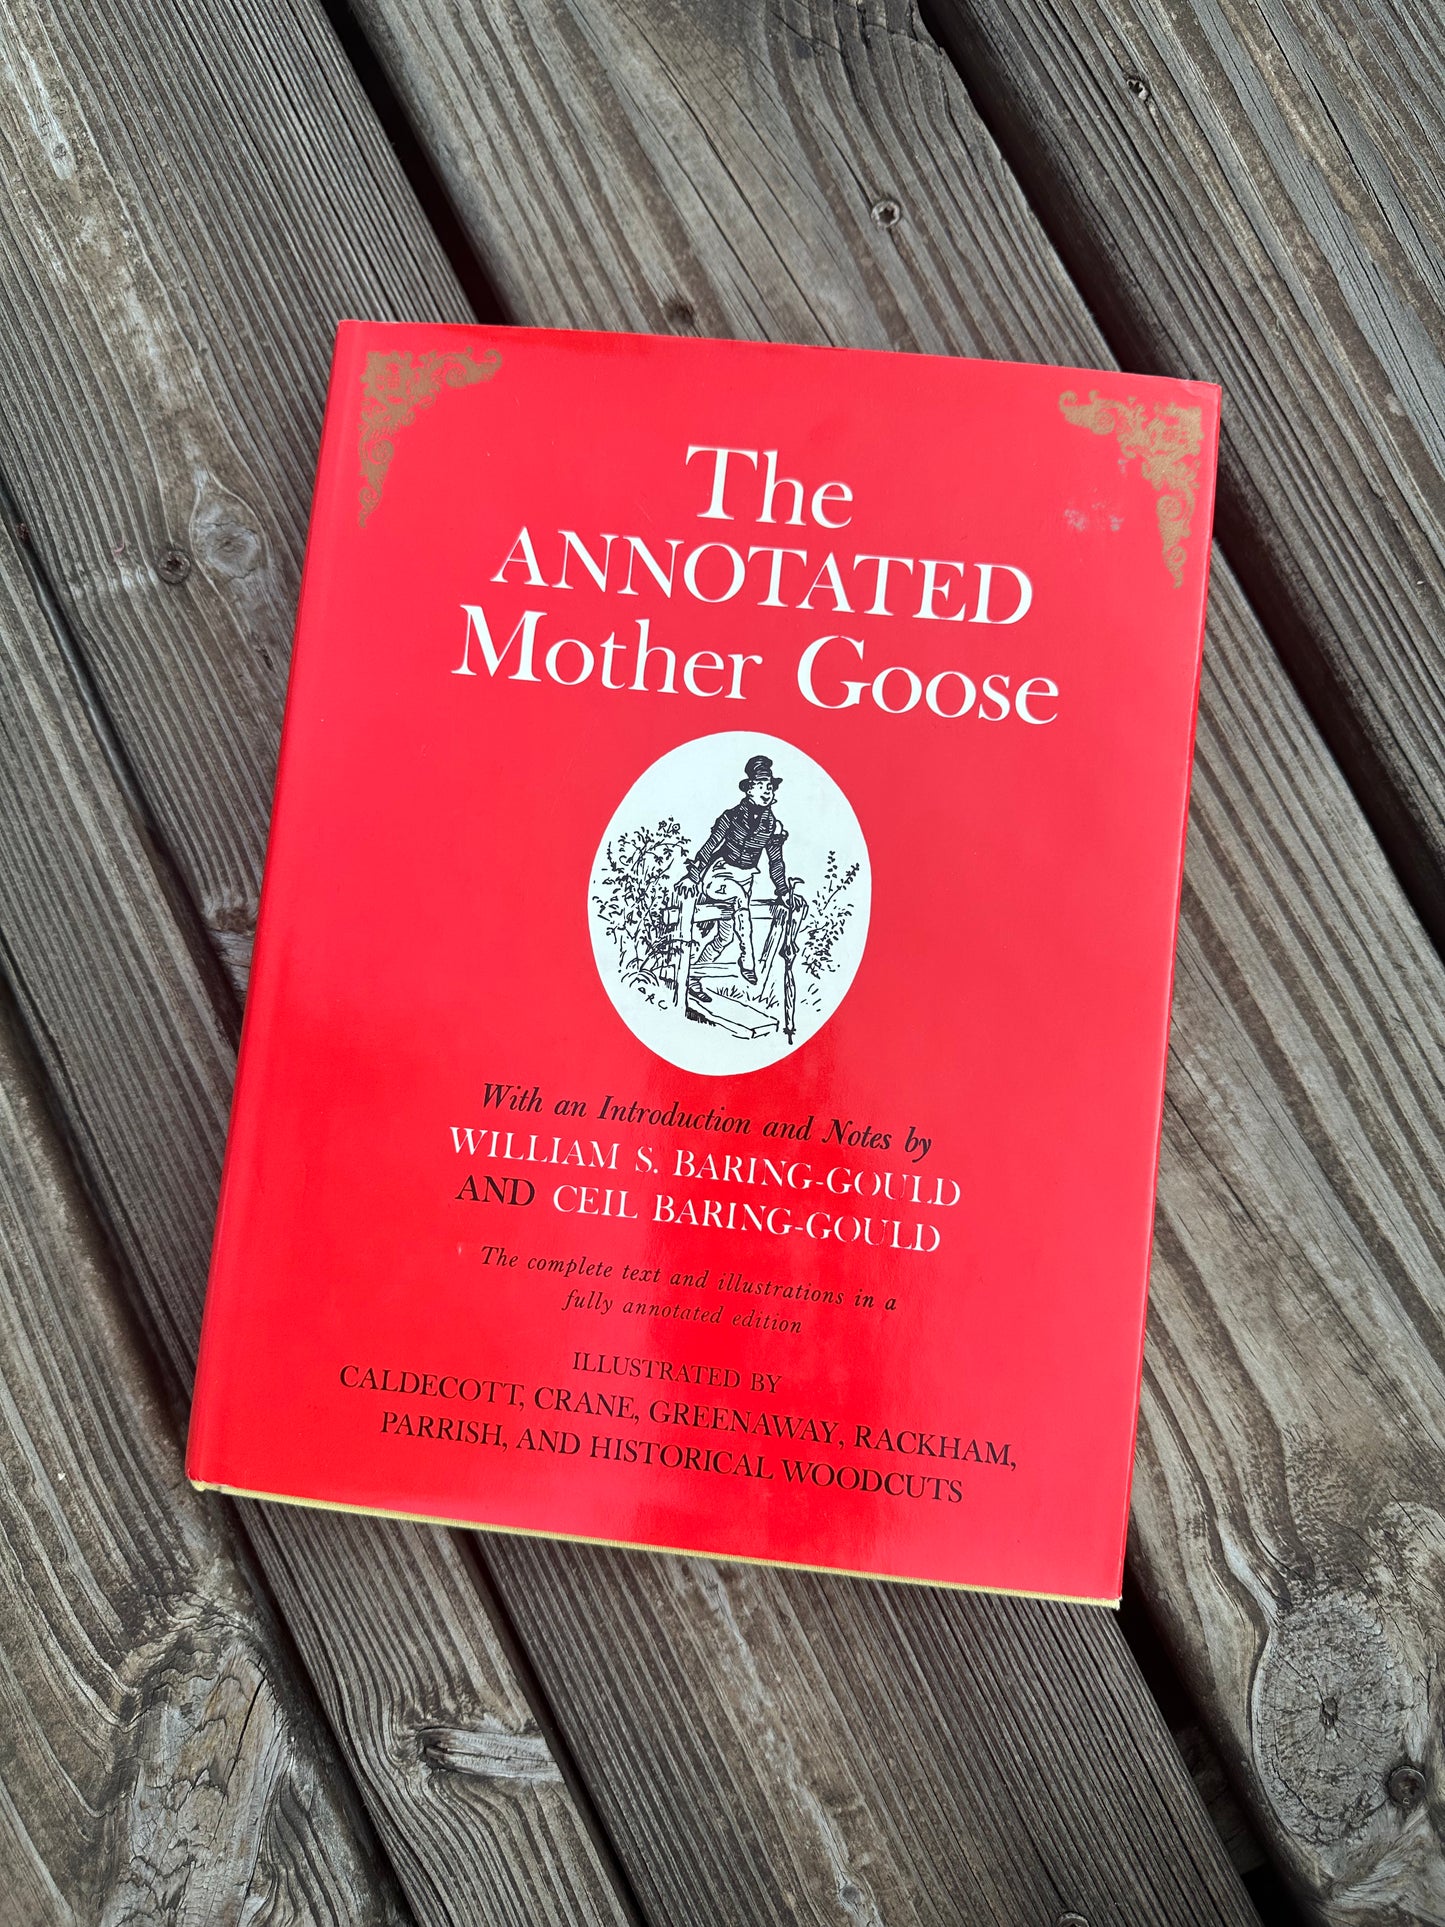 The Annotated Mother Goose